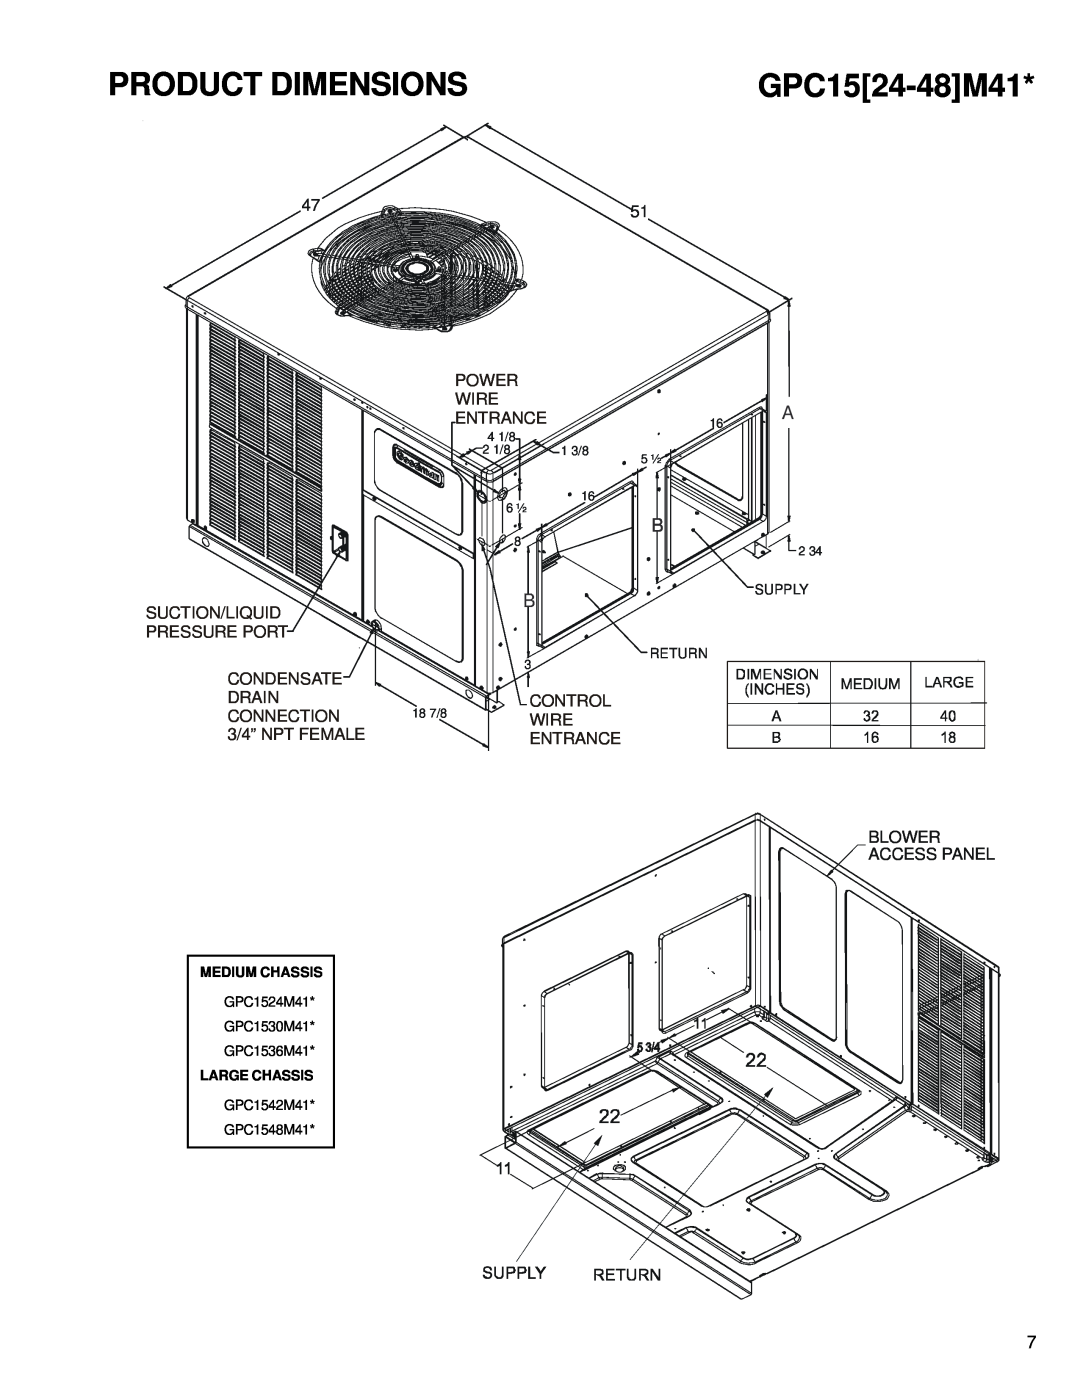 Goodman Mfg GPC15 SEER service manual Product Dimensions, GPC1524-48M41, Blower Access Panel 